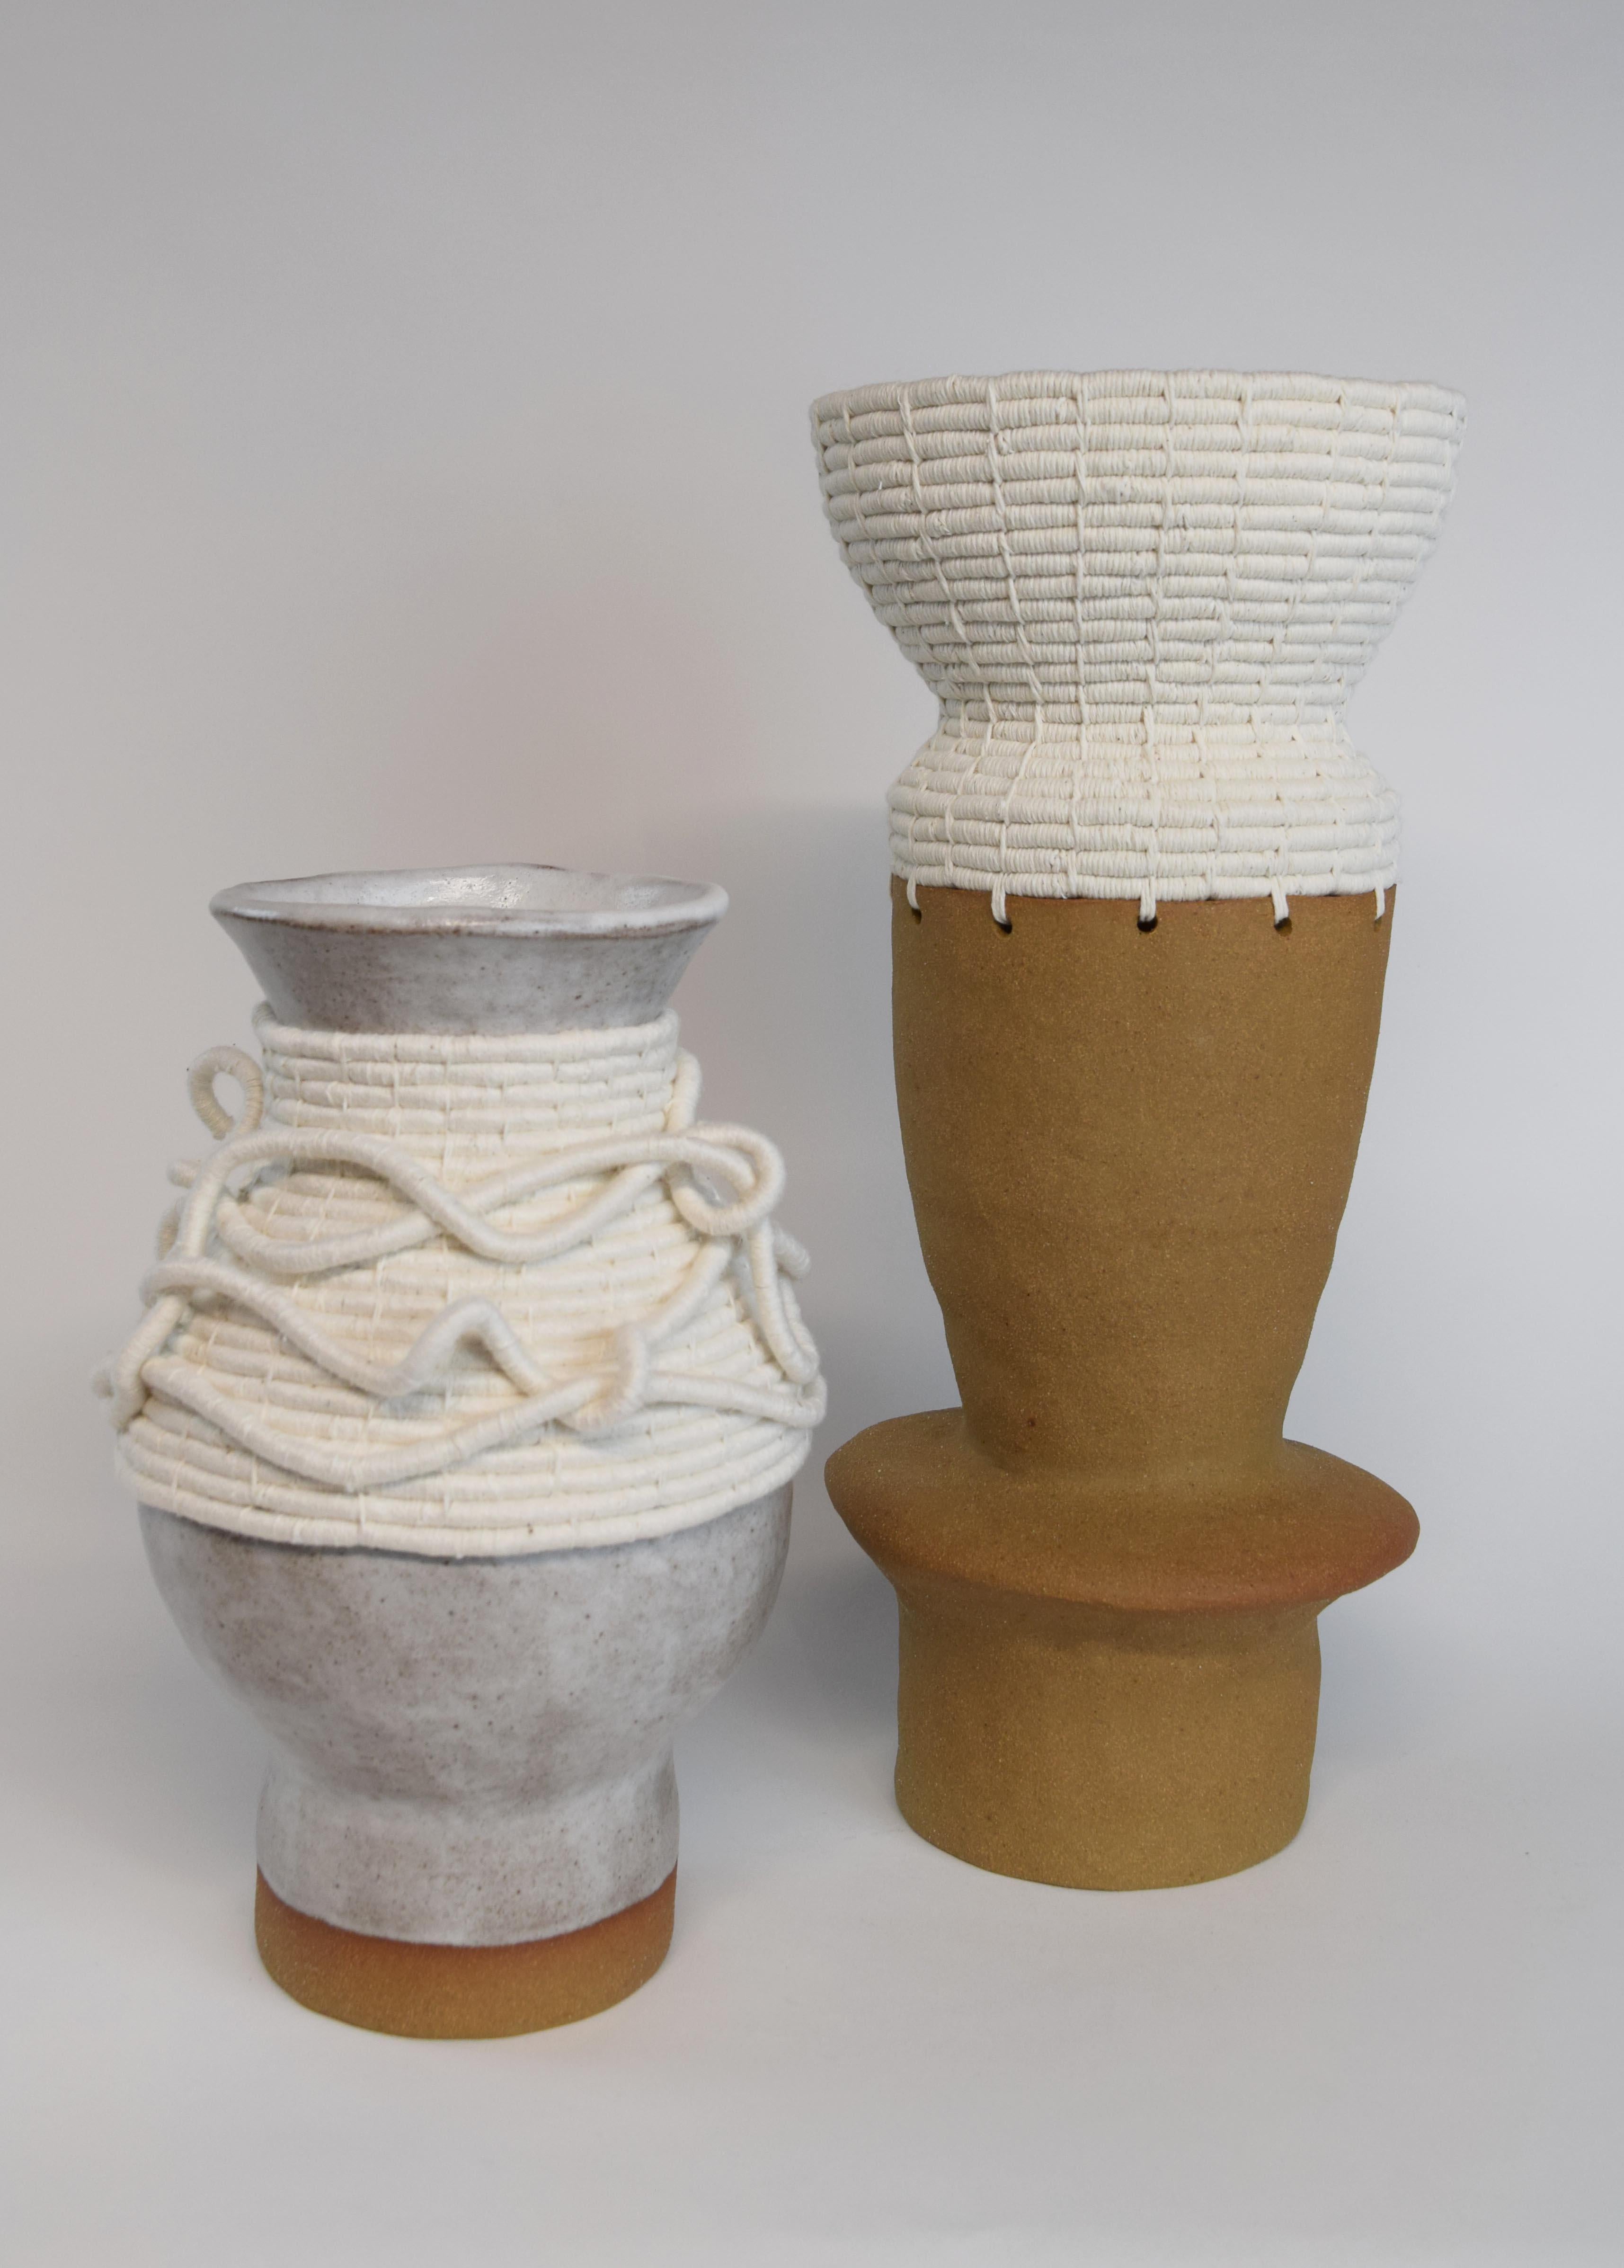 Hand-Crafted One of a Kind Ceramic and Woven Cotton Vessel #739, Natural Clay & White Details